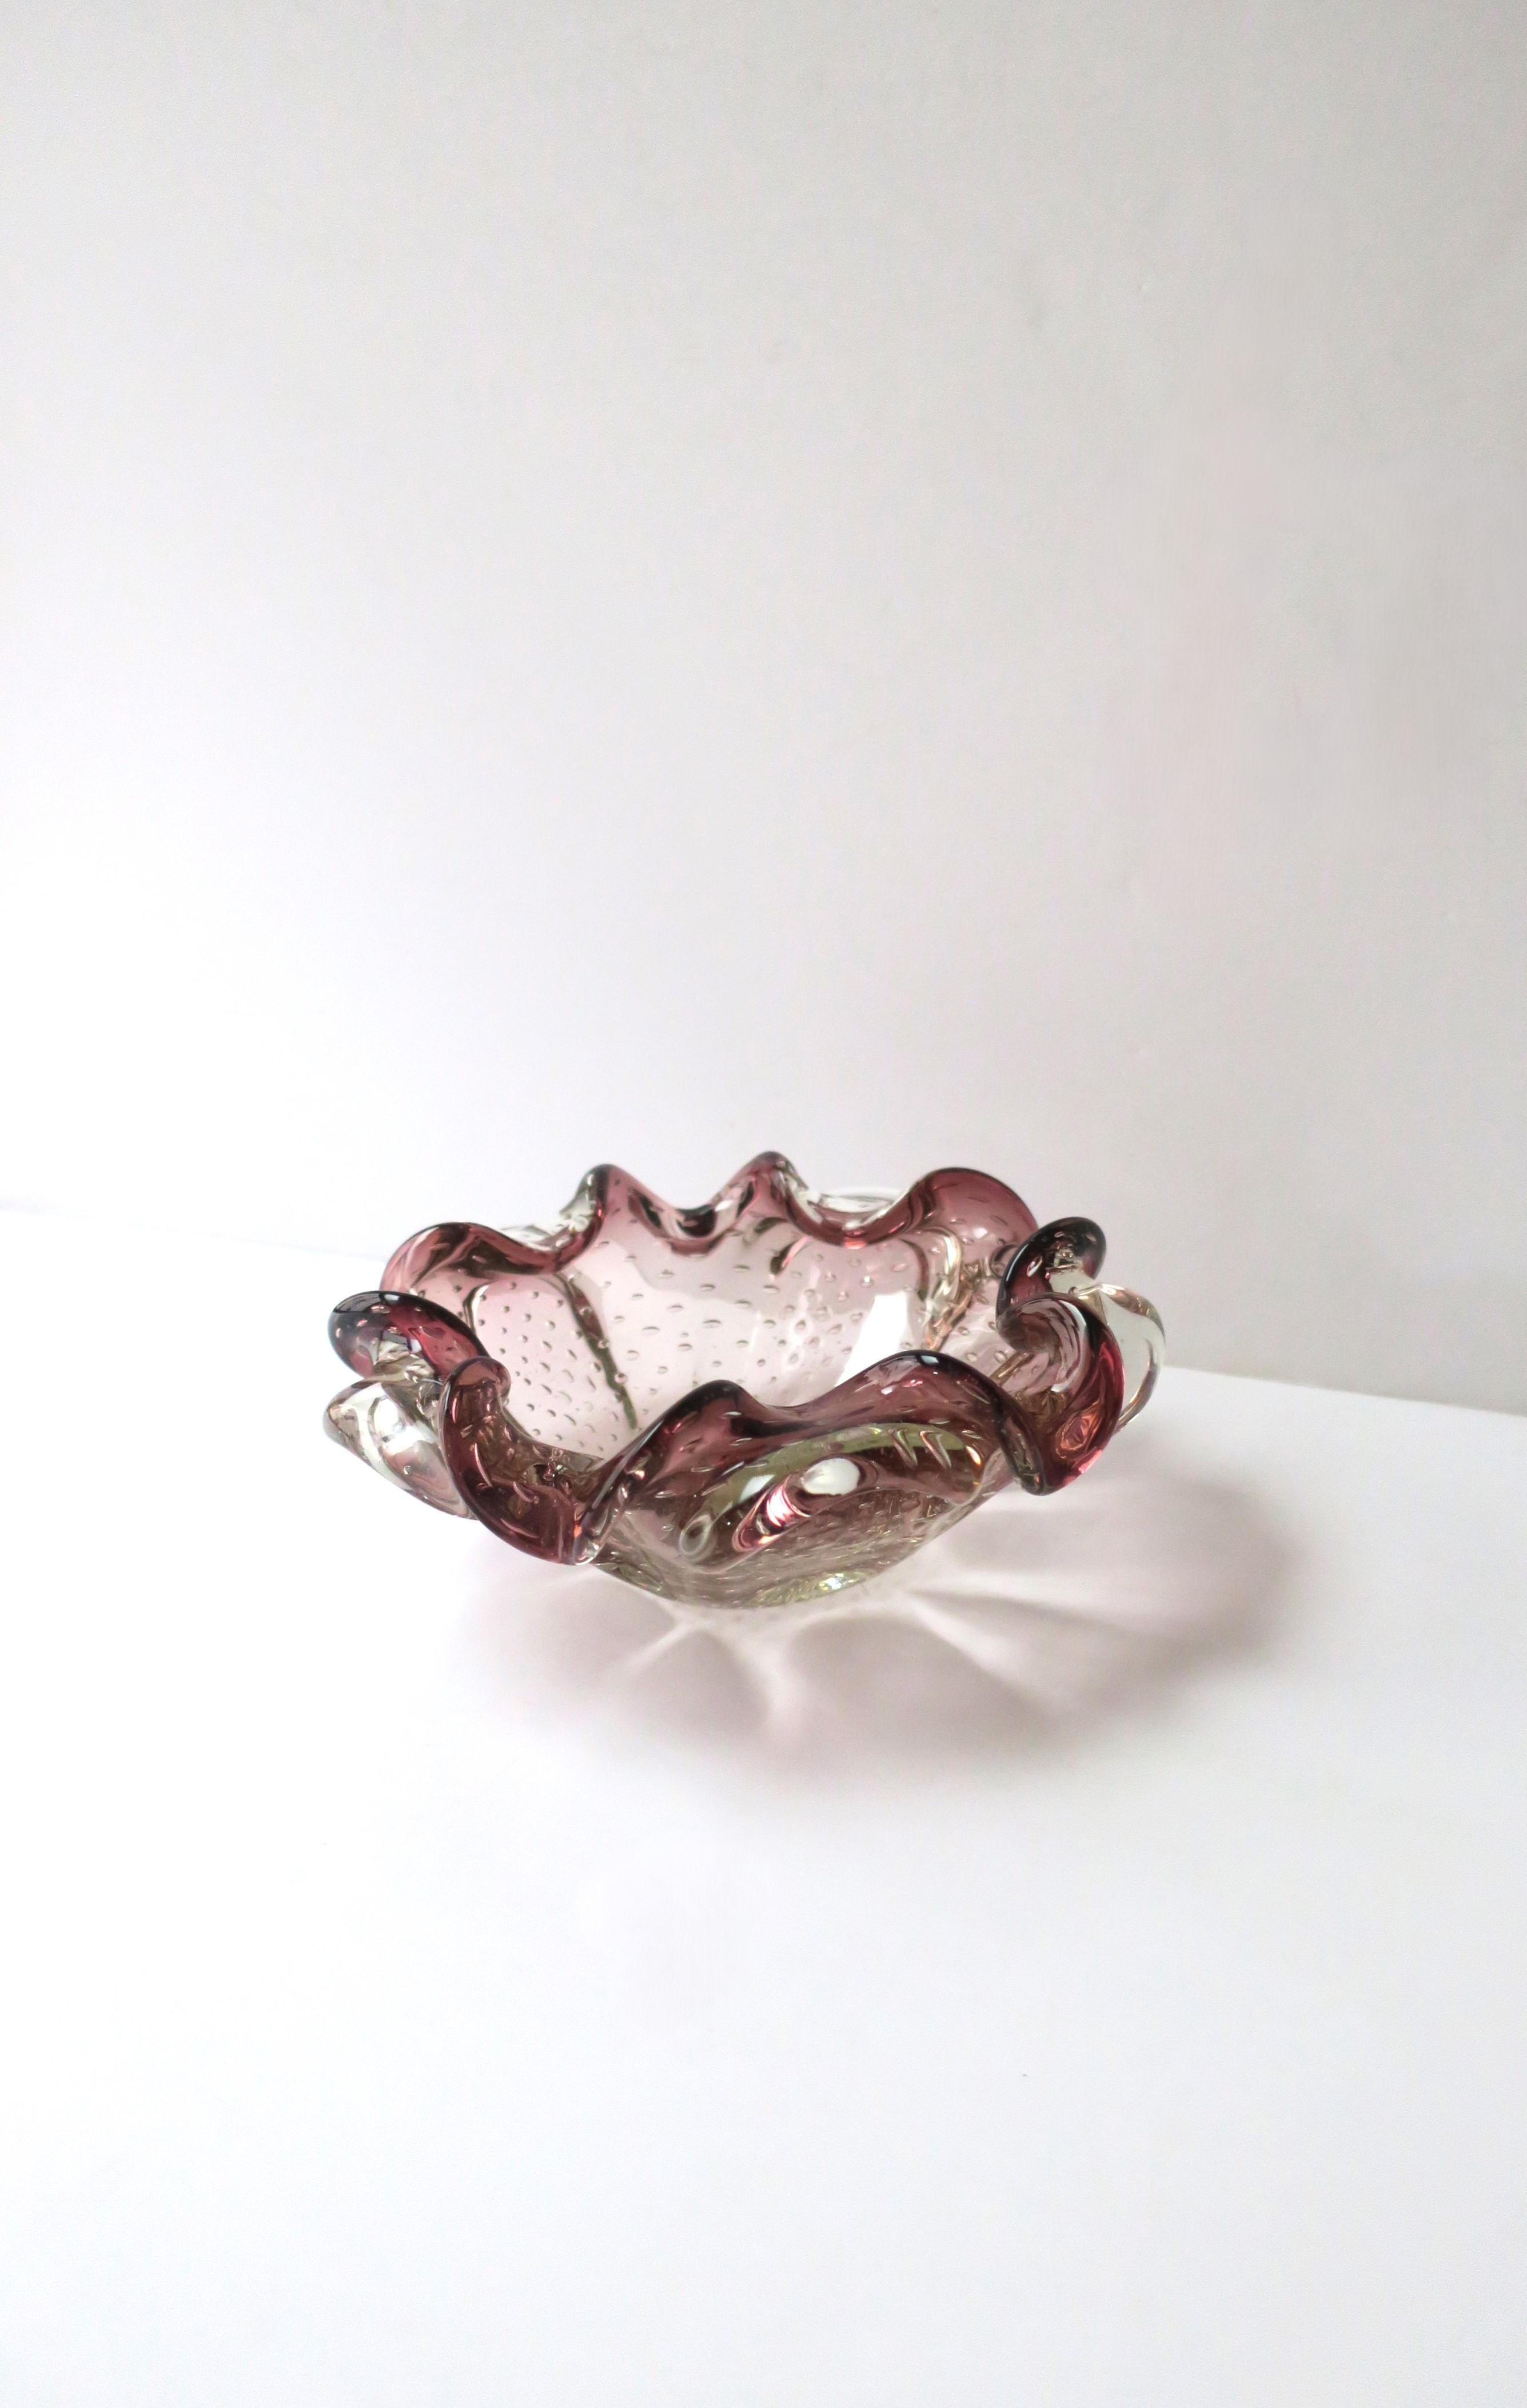 A beautiful and substantial vintage Italian Murano burgundy/plum and transparent art glass bowl with a controlled bubble design, Midcentury Modern design period, circa mid-20th century, Italy. Great as a standalone piece on a cocktail table, etc.,